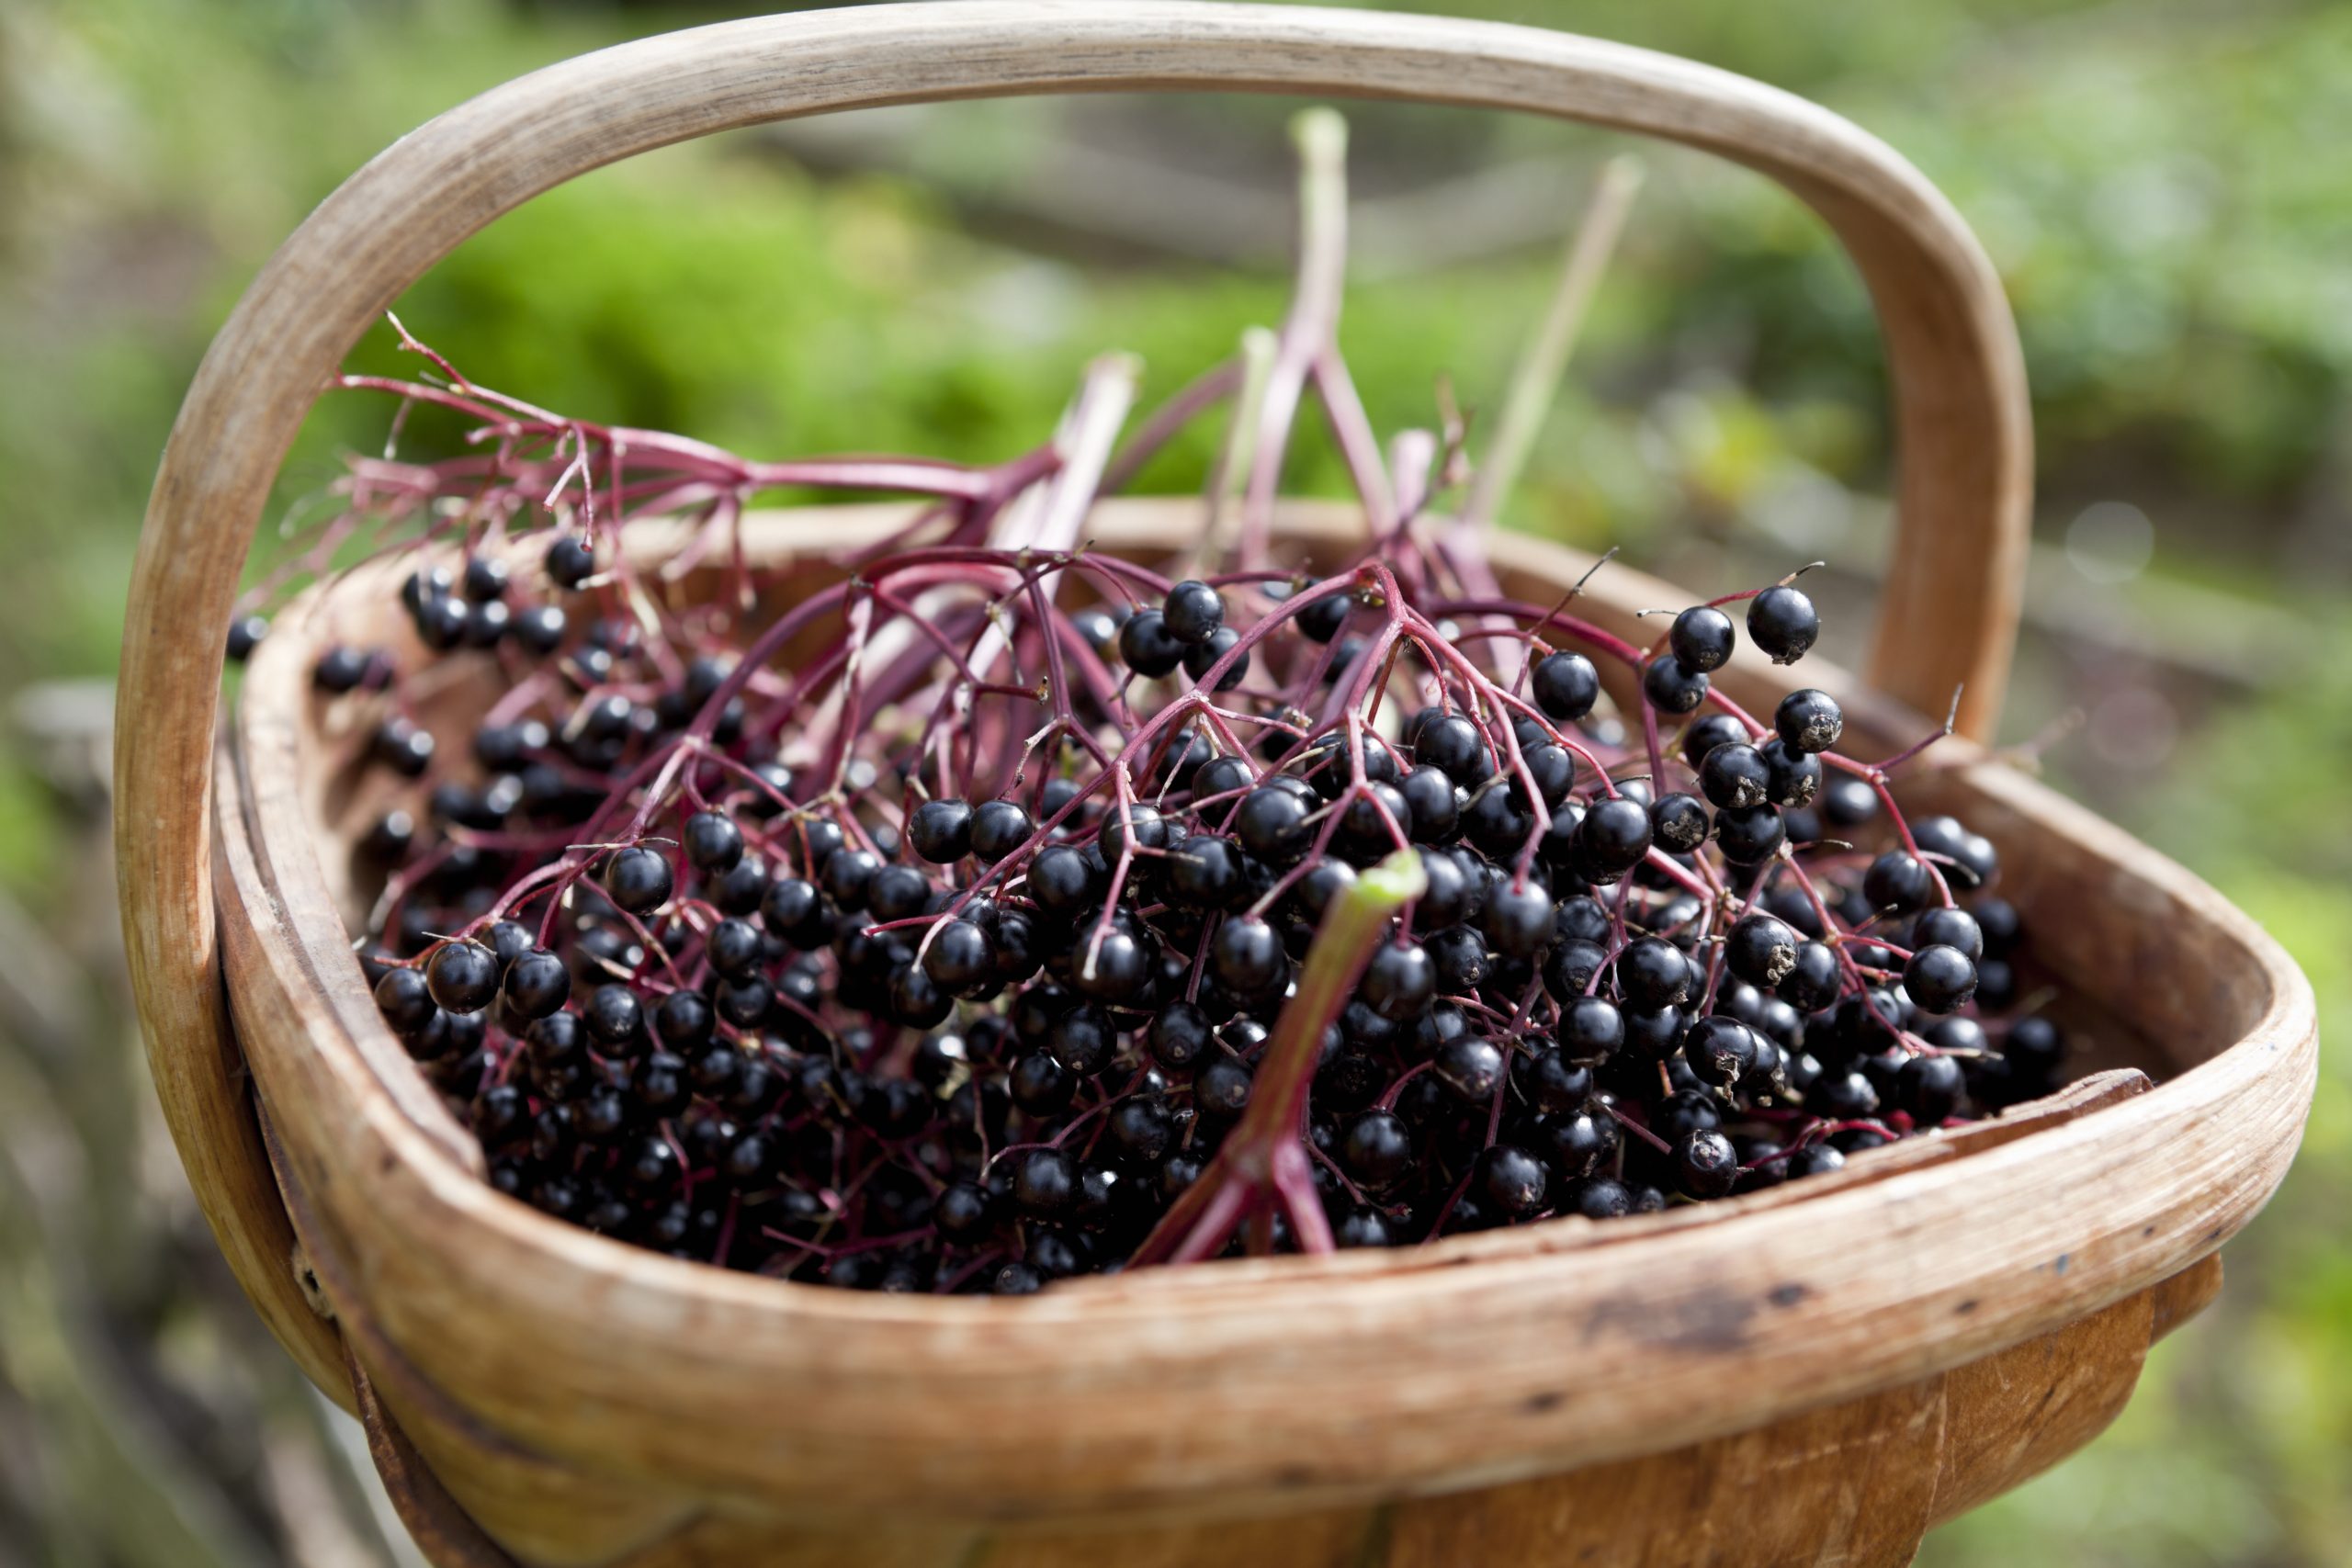 Freshly harvested hedgerow elderberries (Sambuca nigra) lend themselves to a variety of uses. They make quite a passable pie, a toothsome jelly, and a wine cordial that is sheer nectar. Elderberry juice or concentrate is also widely recommended for building the immune system. 